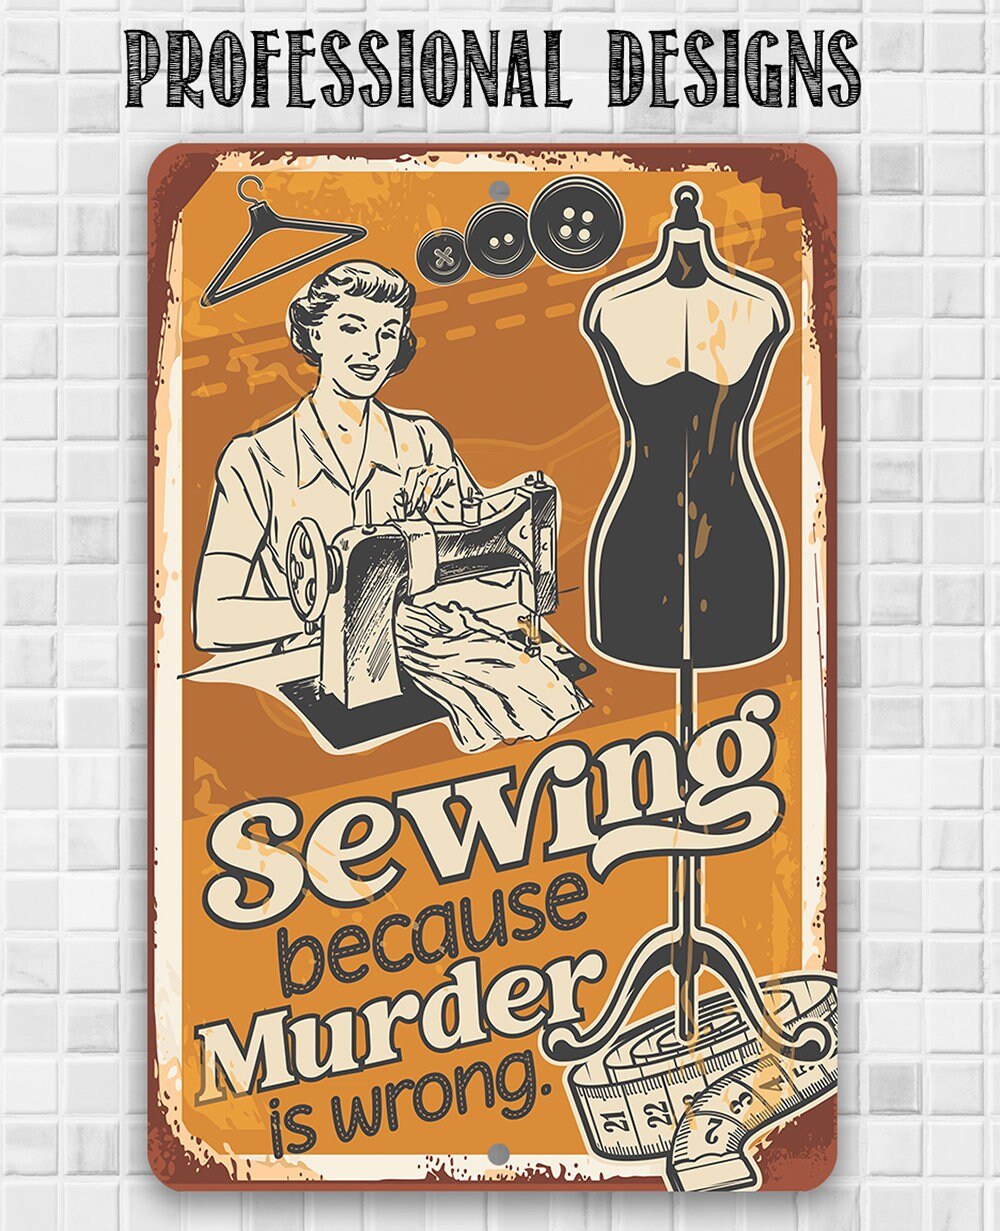 Sewing Because Murder is Wrong - Metal Sign Metal Sign Lone Star Art 